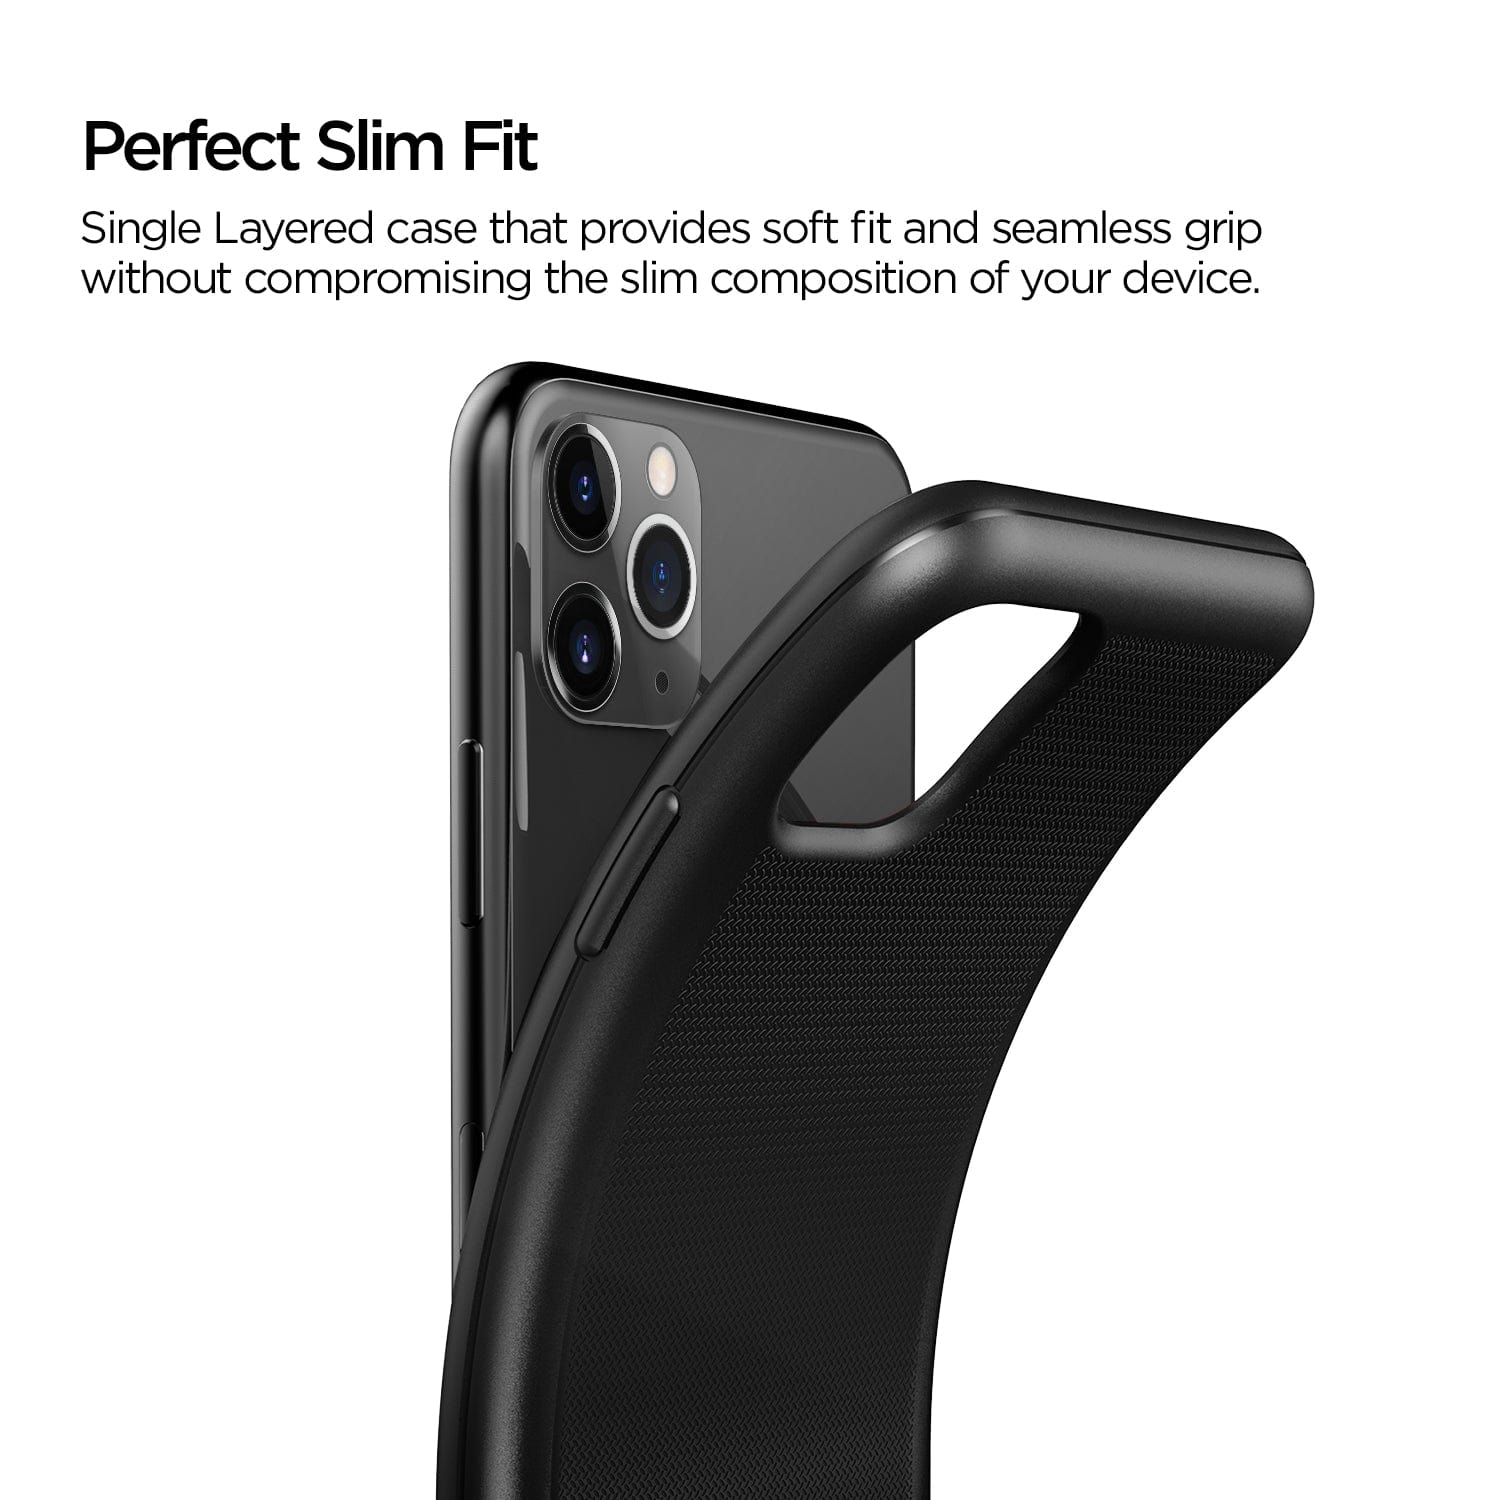 VRS DESIGN Damda Single Fit Case And Cover for iPhone11 Pro Max (Black)